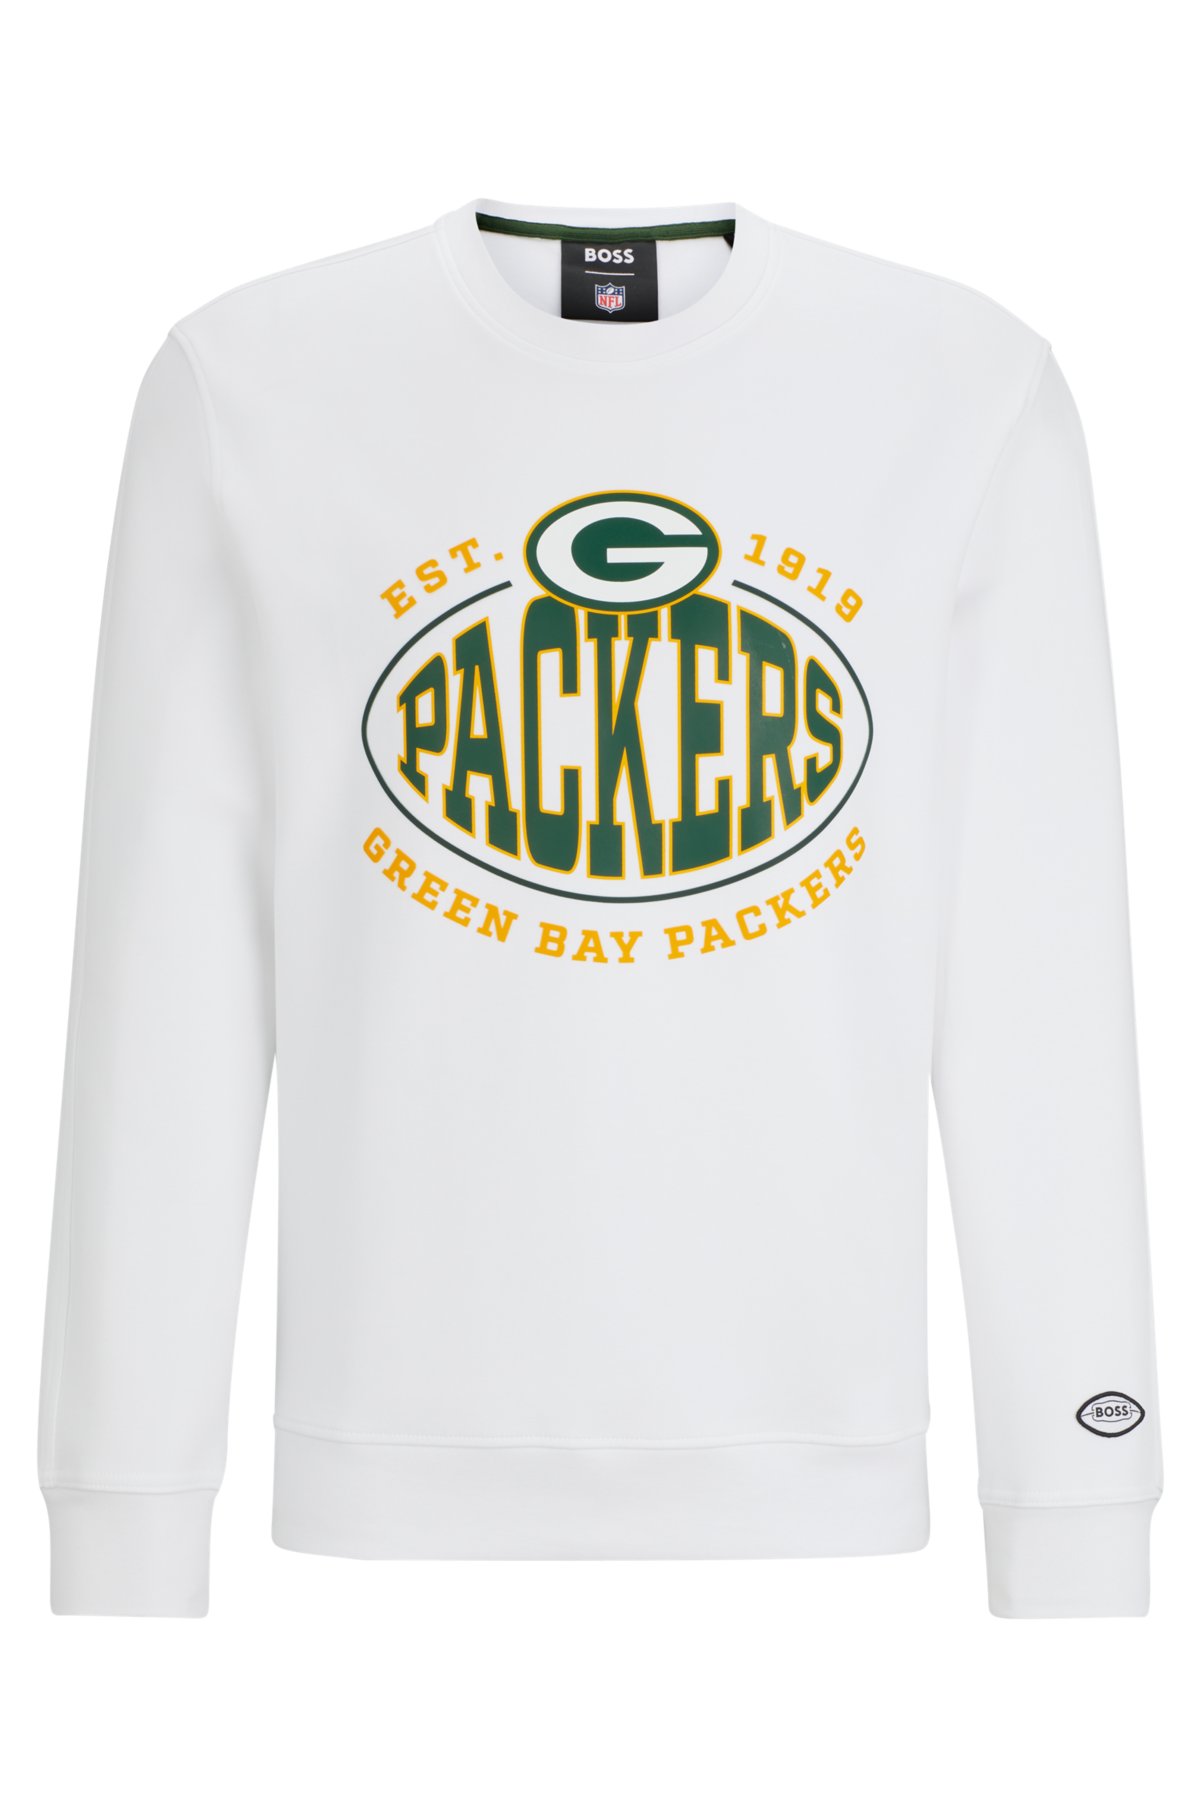 Boss x NFL Cotton-Blend Sweatshirt with Collaborative branding- Packers | Men's Tracksuits Size XL